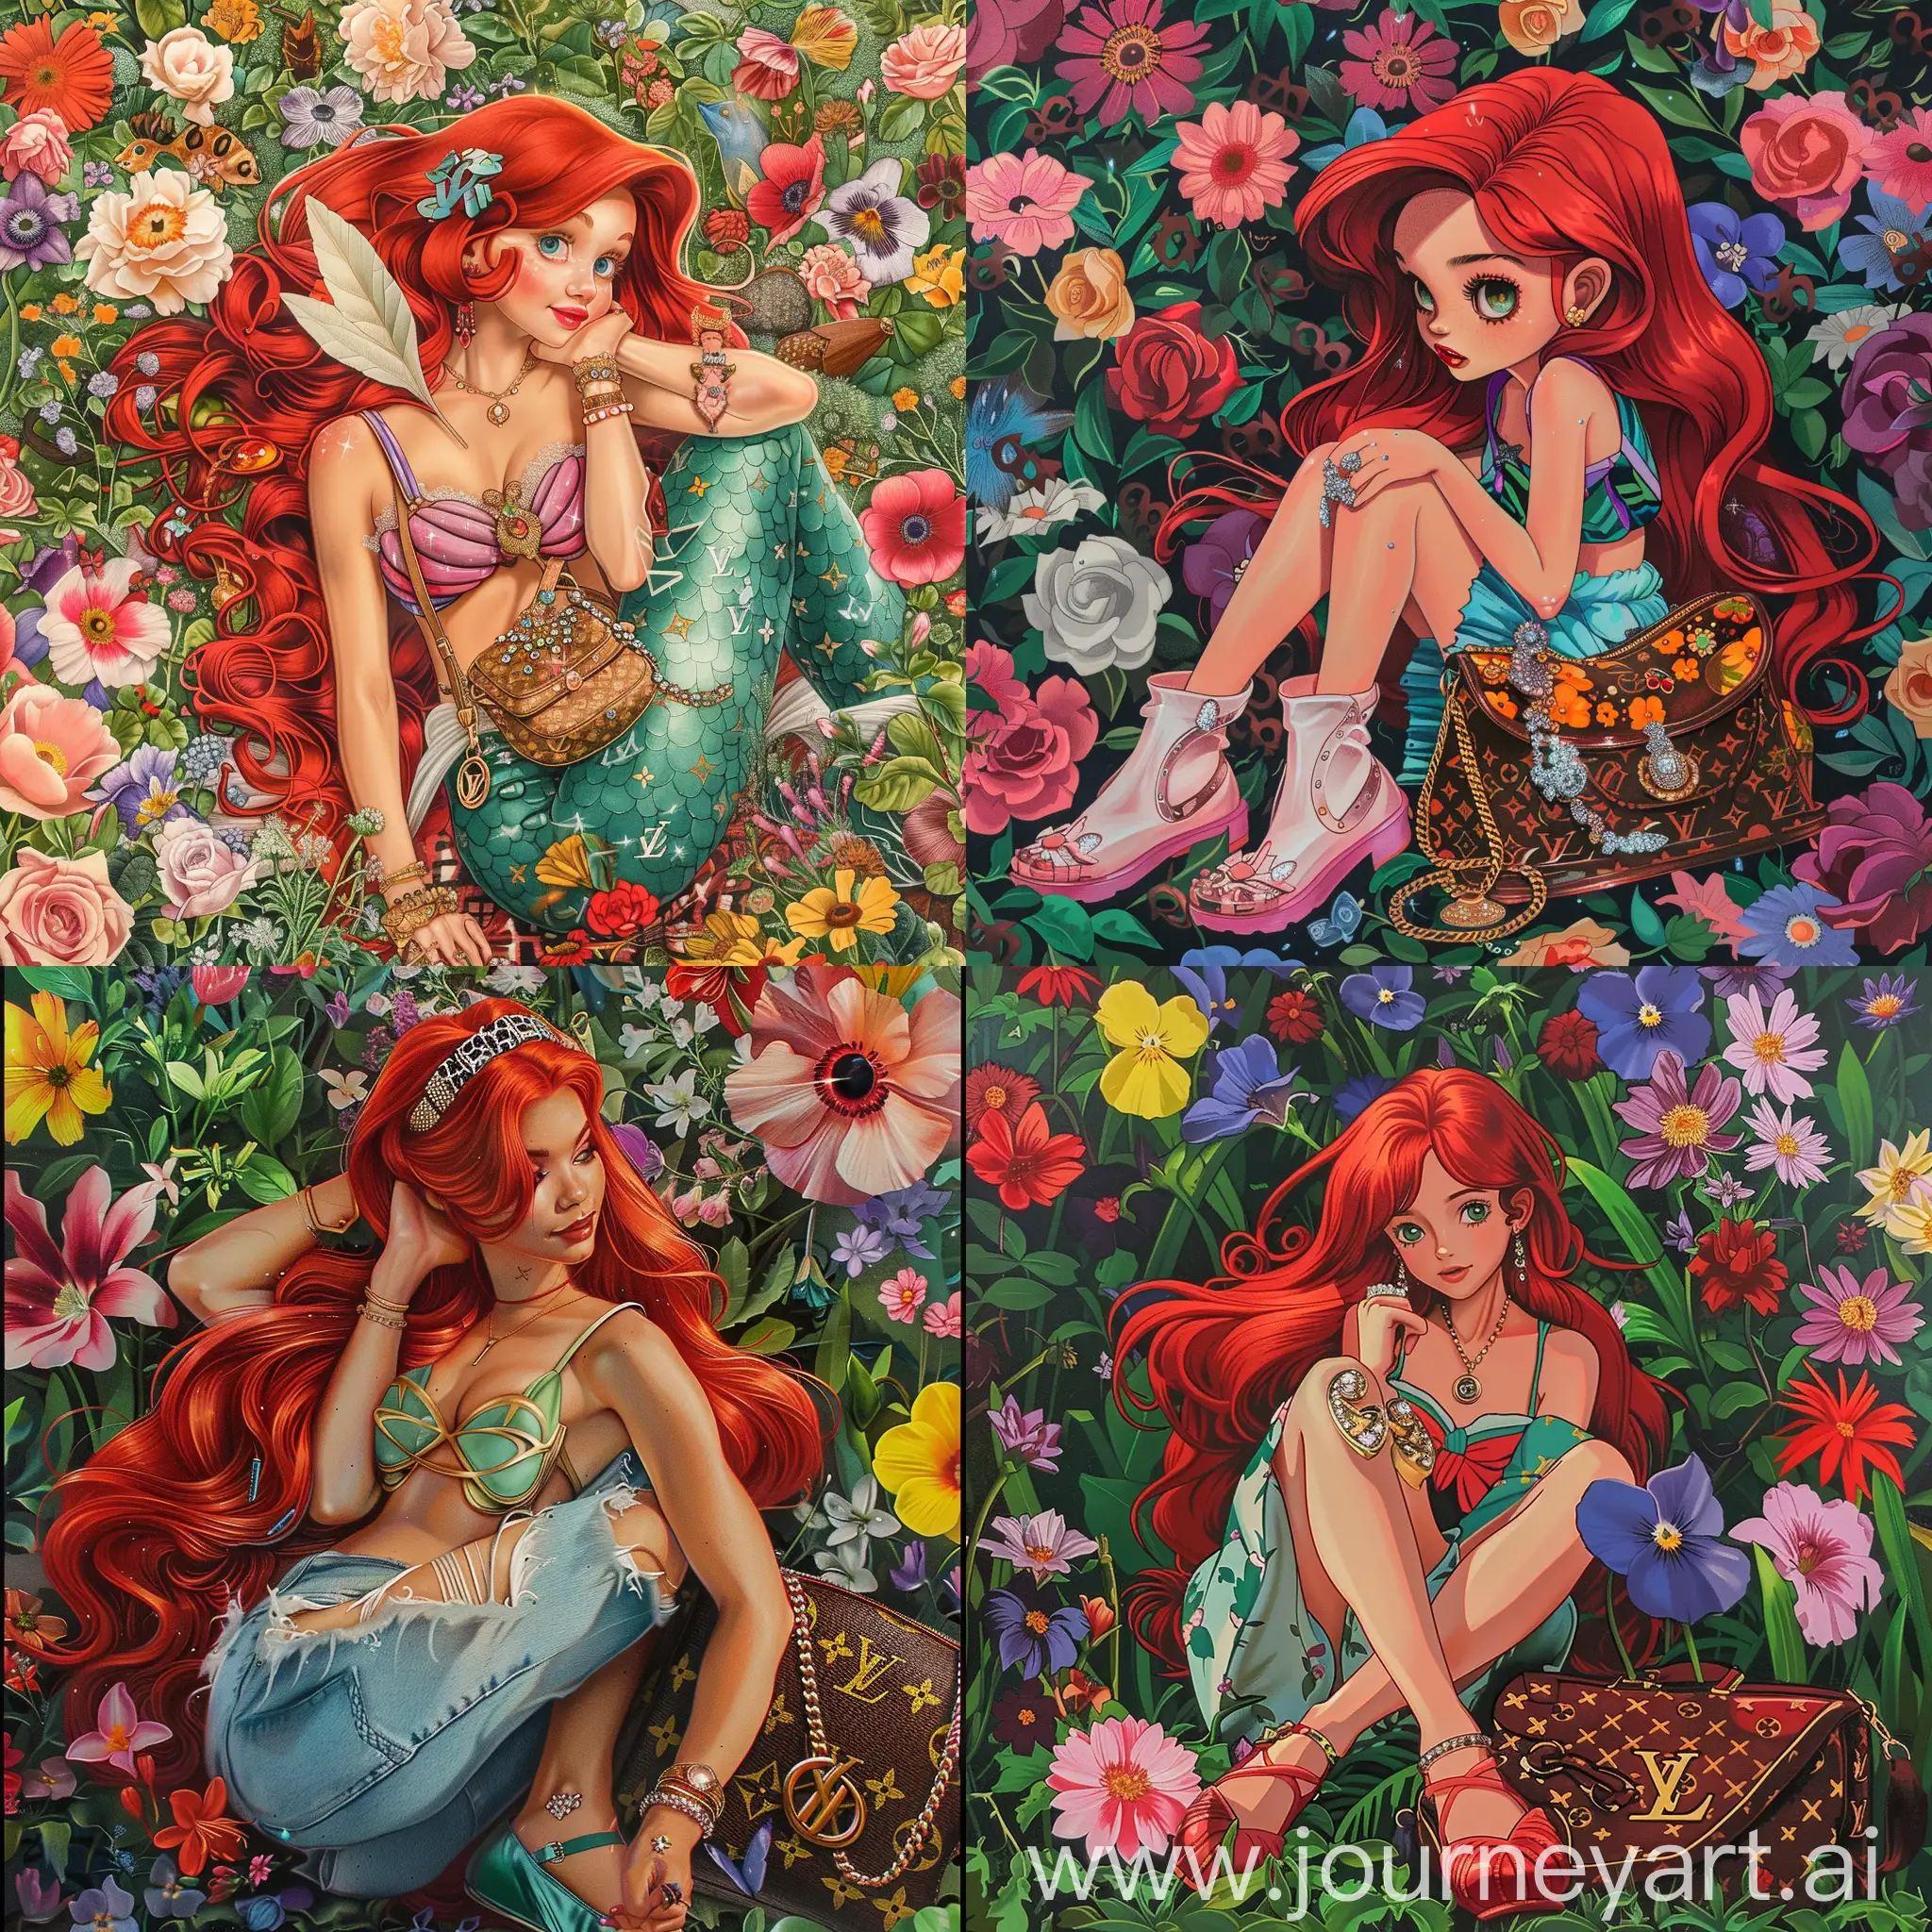 Fashionable-Princess-Ariel-Surrounded-by-Flowers